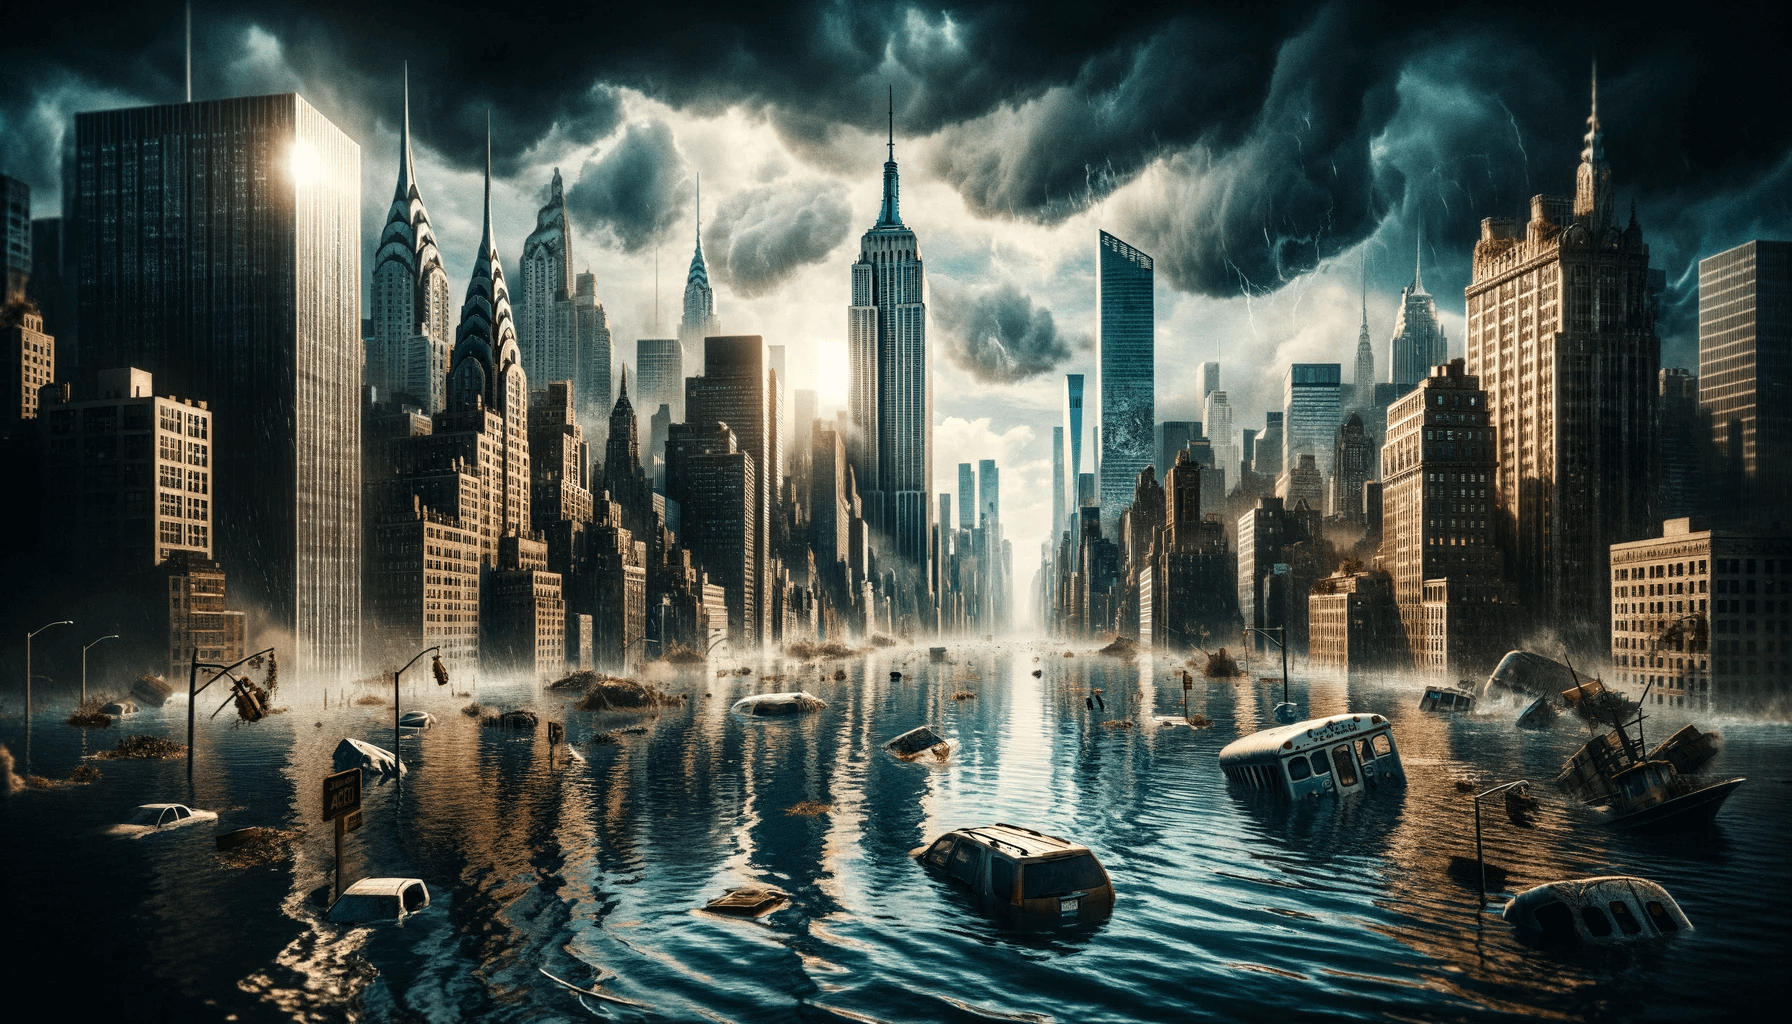 An apocalyptic image of a sinking New York. The image was prepared using artificial intelligence and is not a scientific image